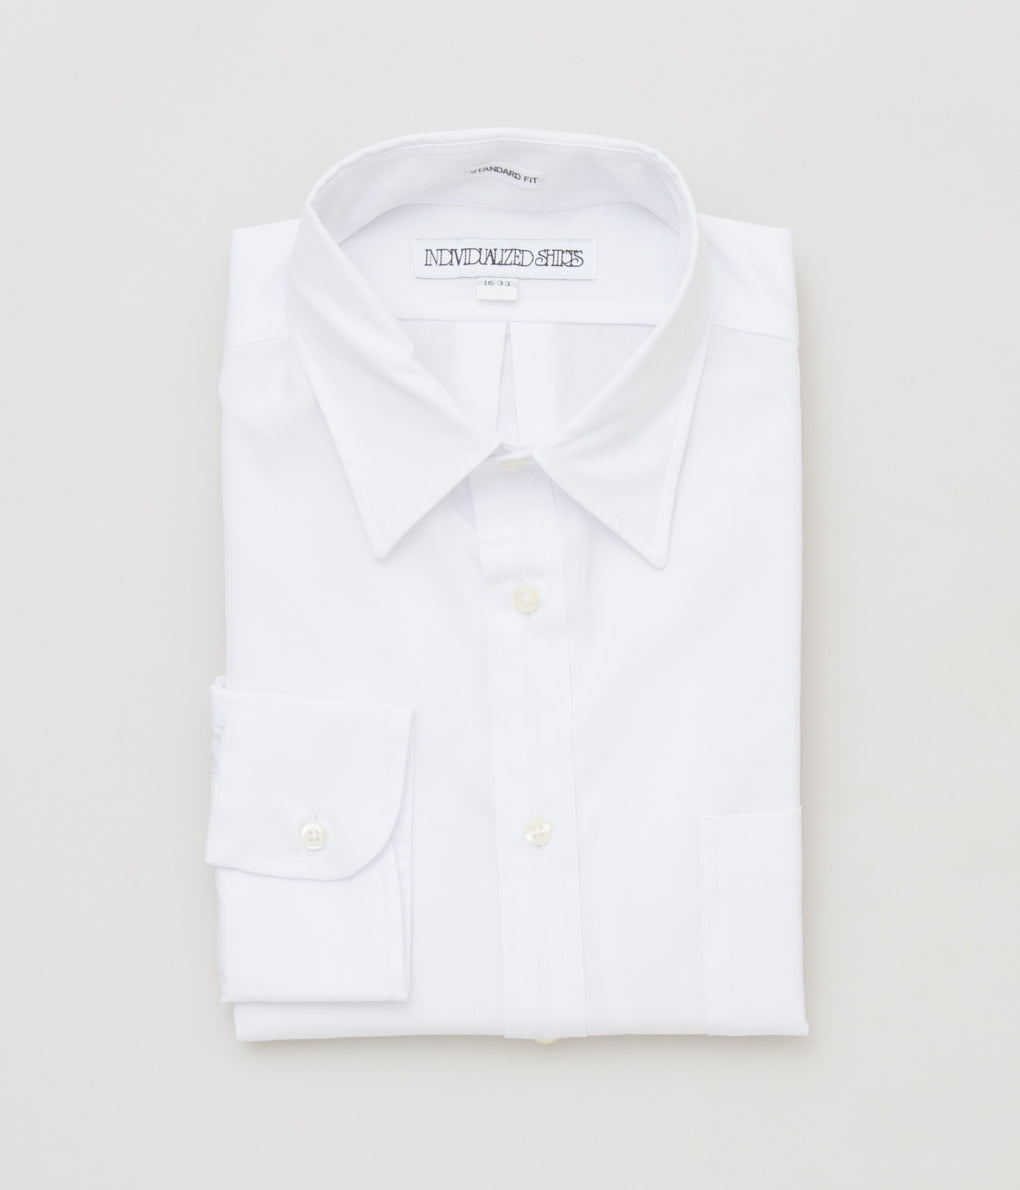 INDIVIDUALIZED SHIRTS "POPLIN (STANDARD FIT TRADITIONAL COLLAR SHIRT)"(WHITE)